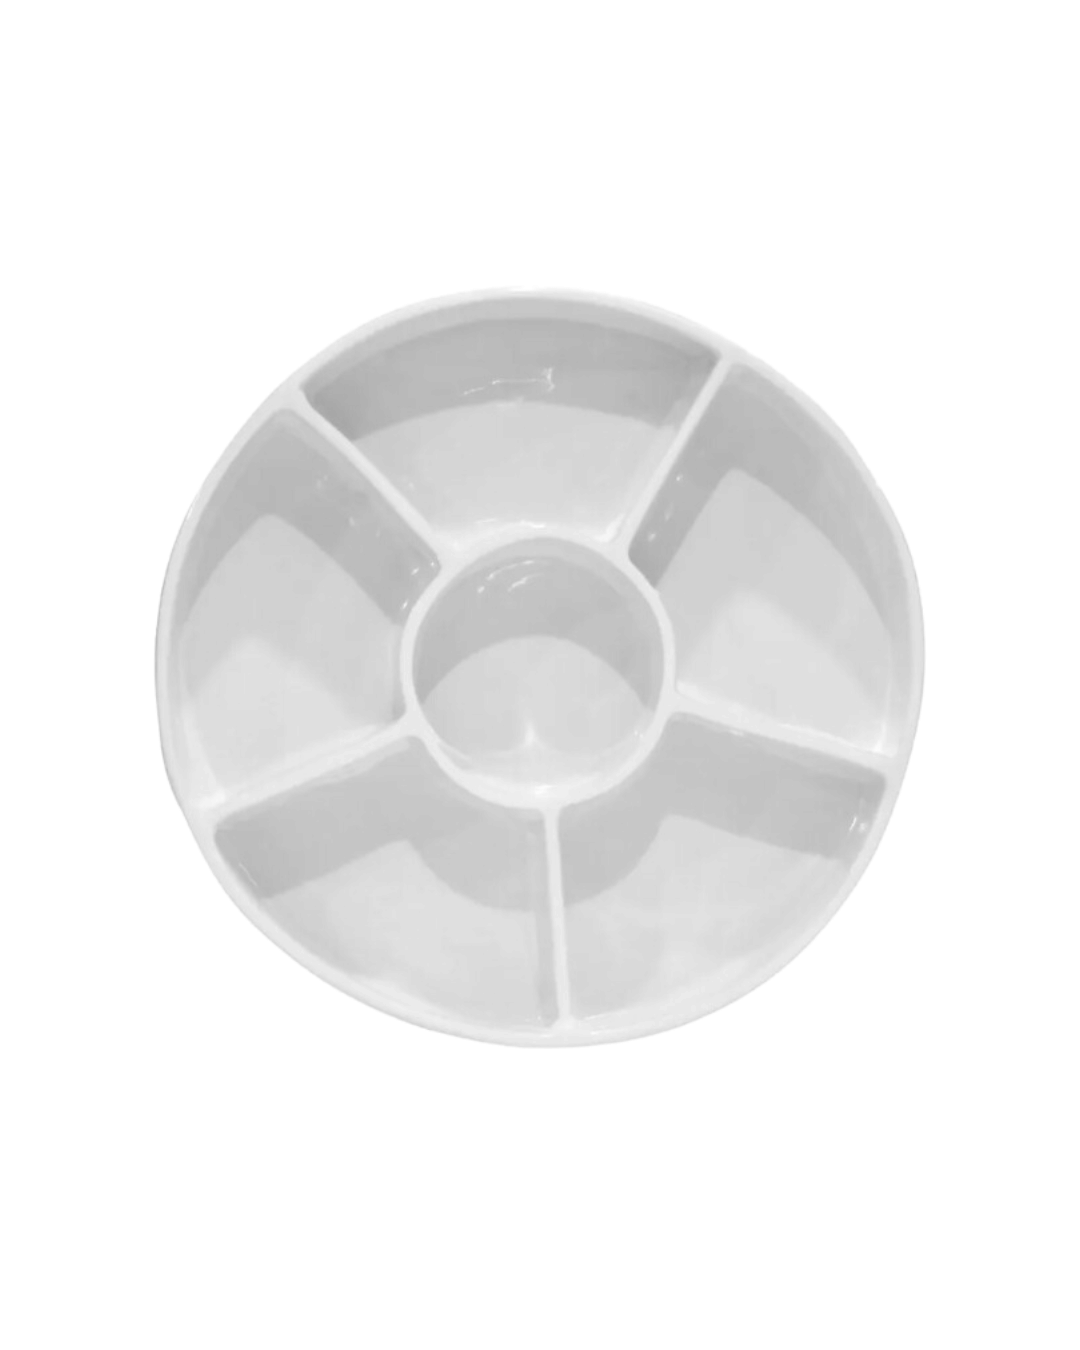 A white, round plastic serving tray with seven compartments, one in the center and six surrounding it, designed in Bungalow style, isolated on a white background. Model: Appetizer Platter No. 717 by Montes Doggett.